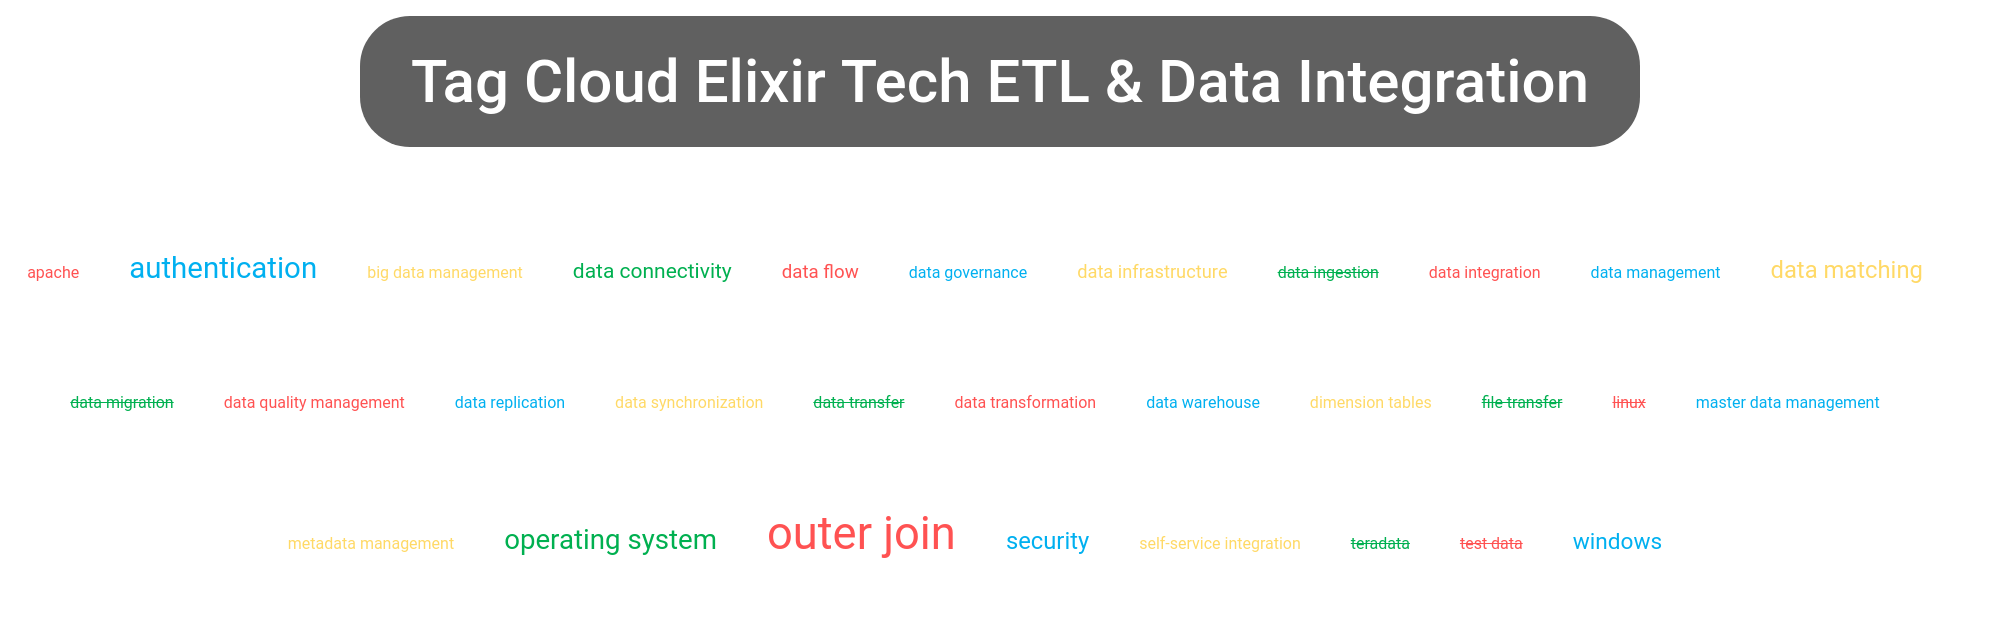 Tag cloud of the Elixir Repertoire software.